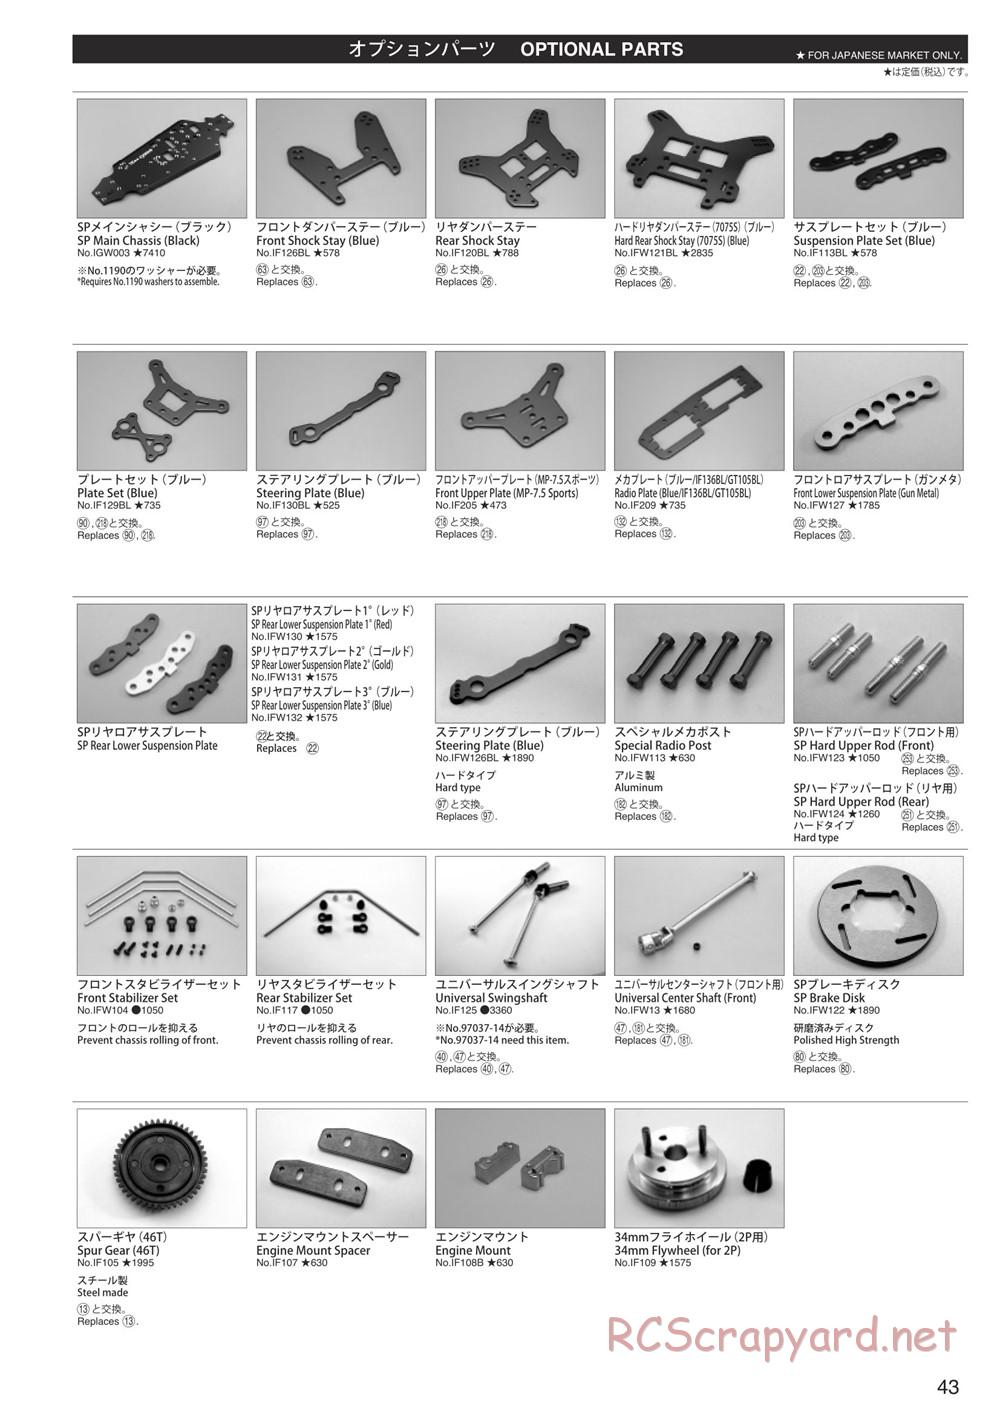 Kyosho - Inferno Neo - Parts List - Page 4